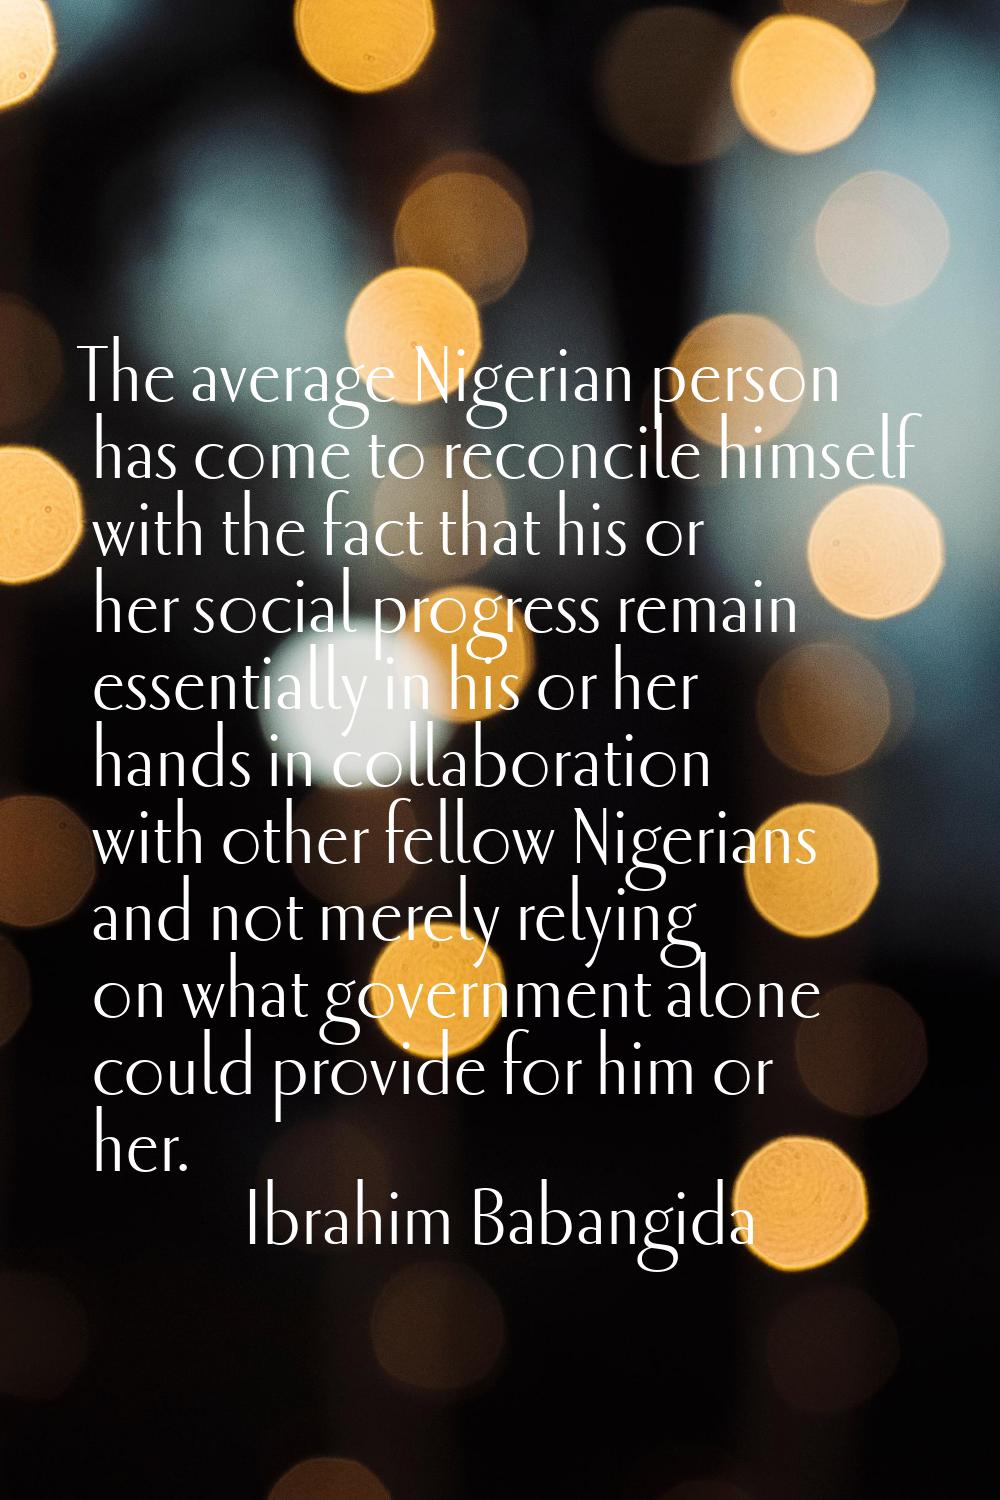 The average Nigerian person has come to reconcile himself with the fact that his or her social prog